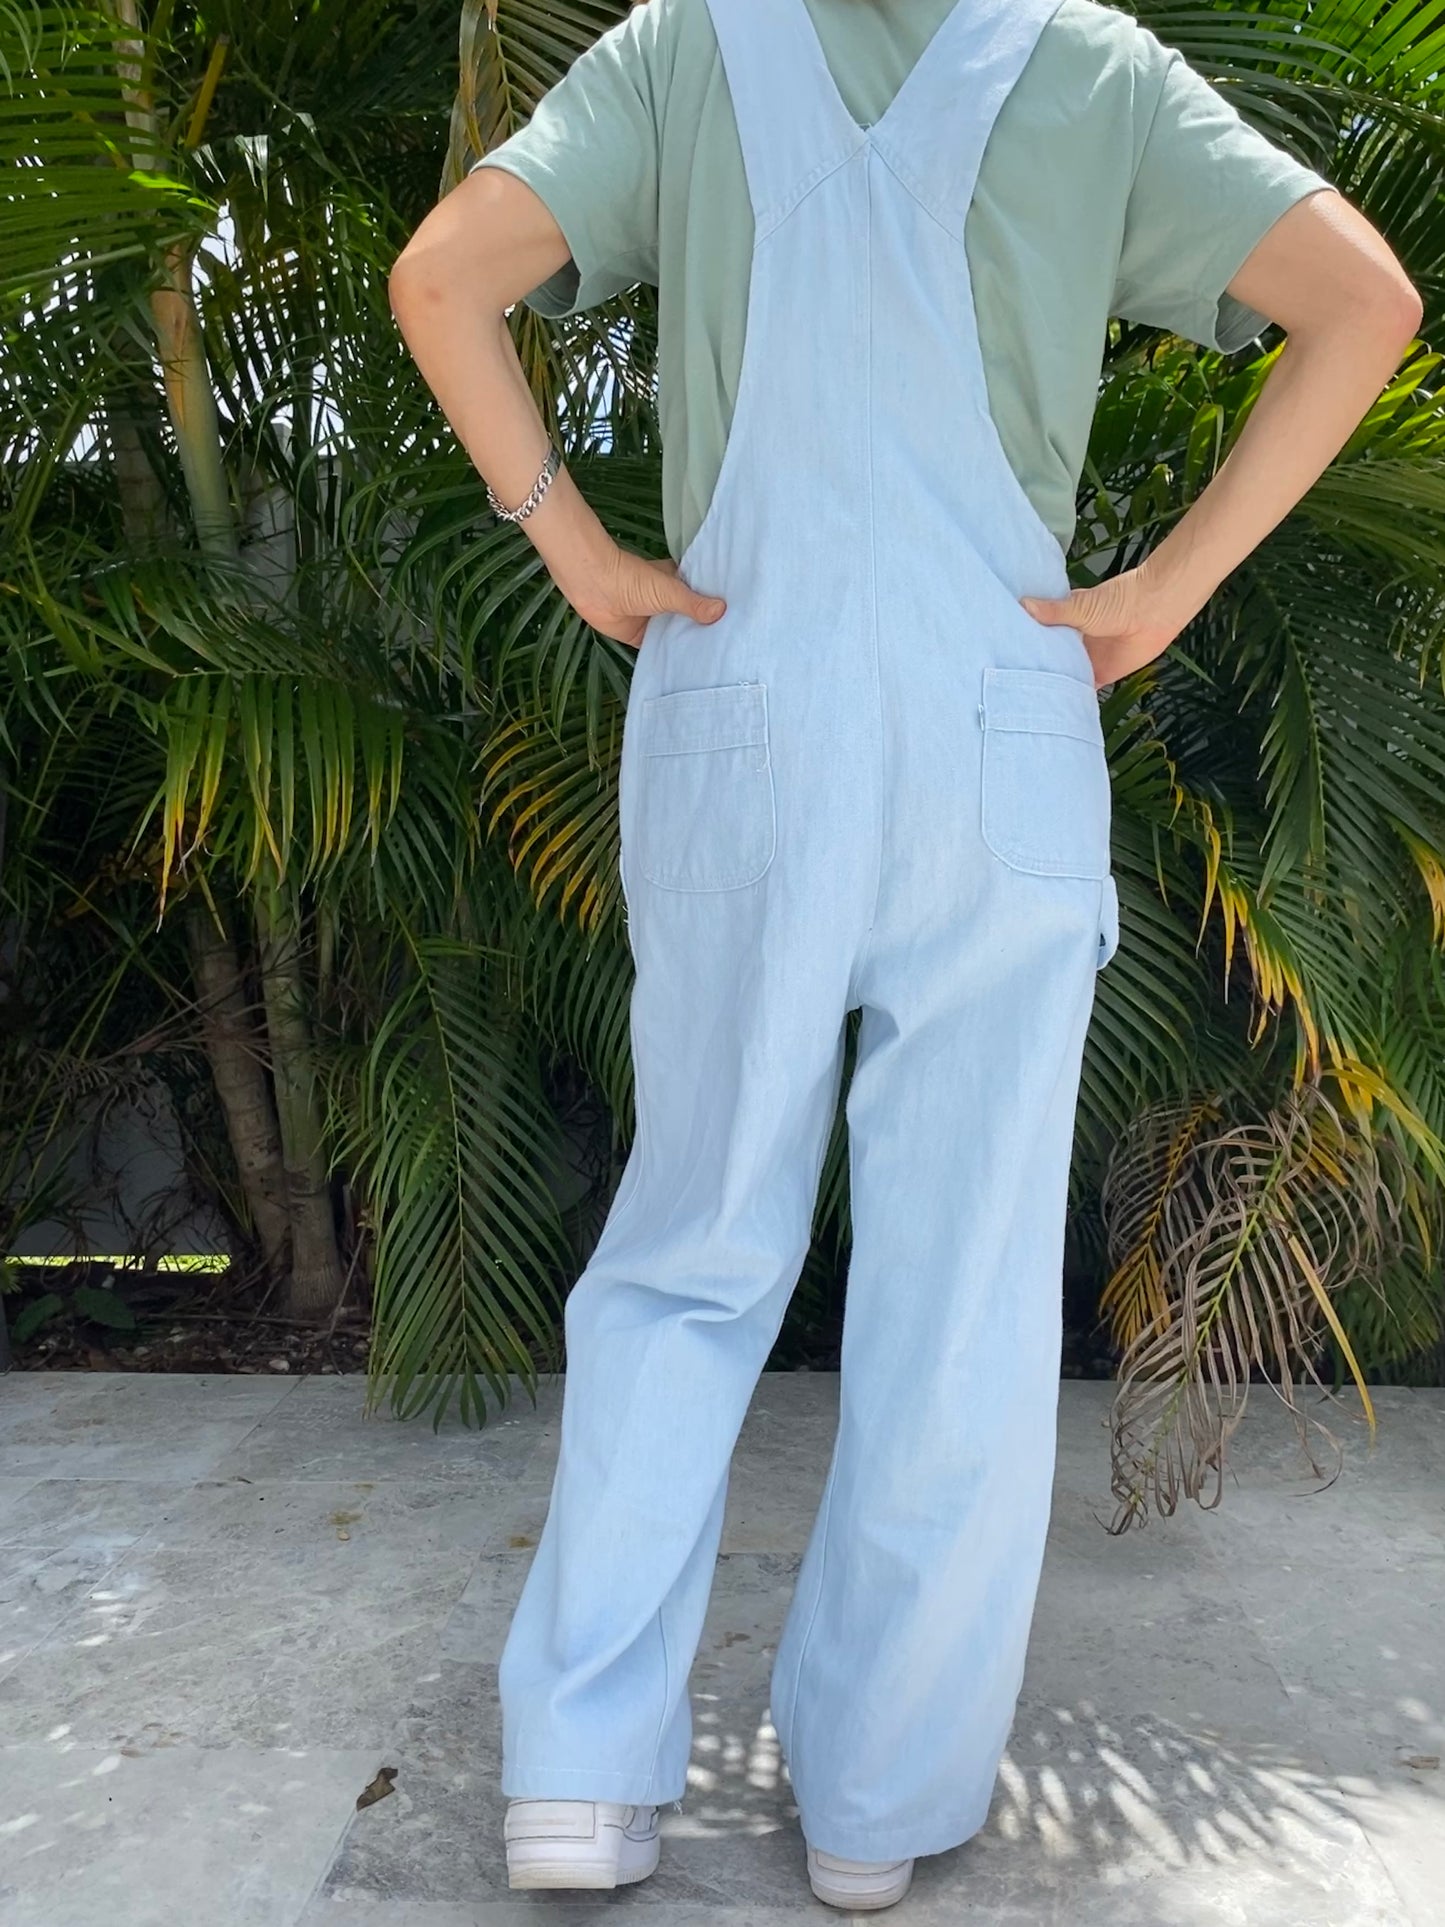 Perfect Light Blue Wash 90s Levis Overalls